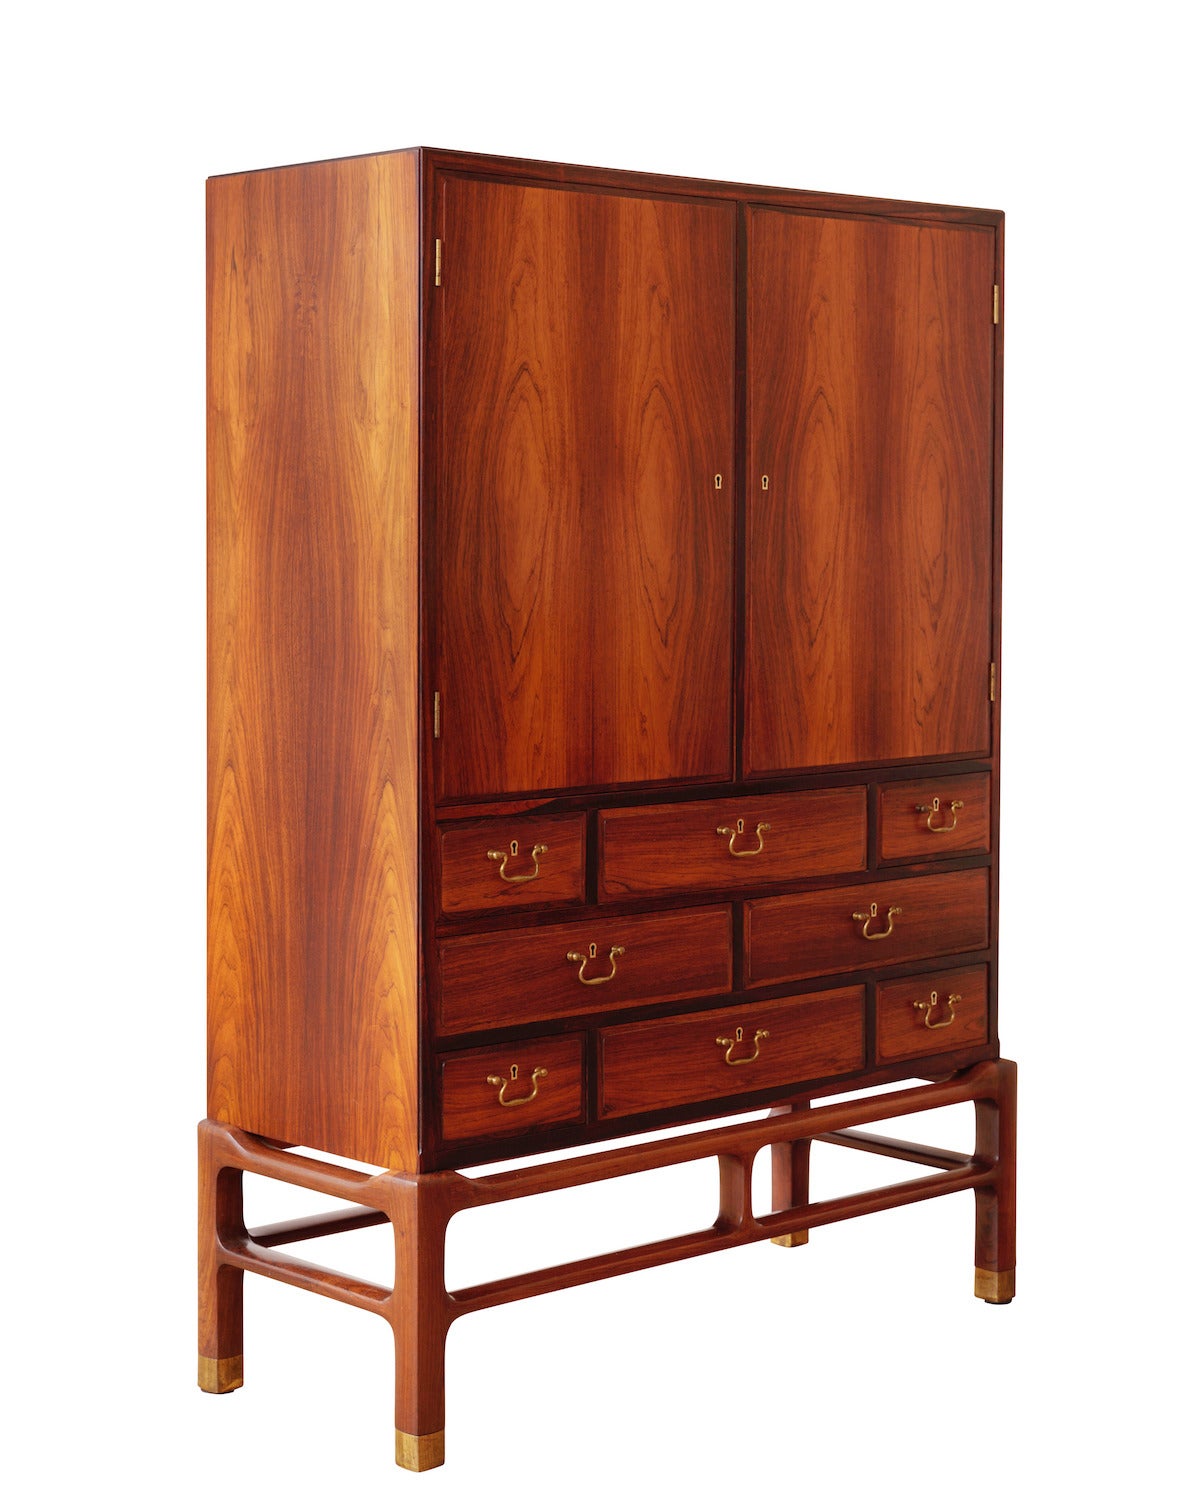 Cabinet with brass fittings, front with two cabinet doors and eight drawers.